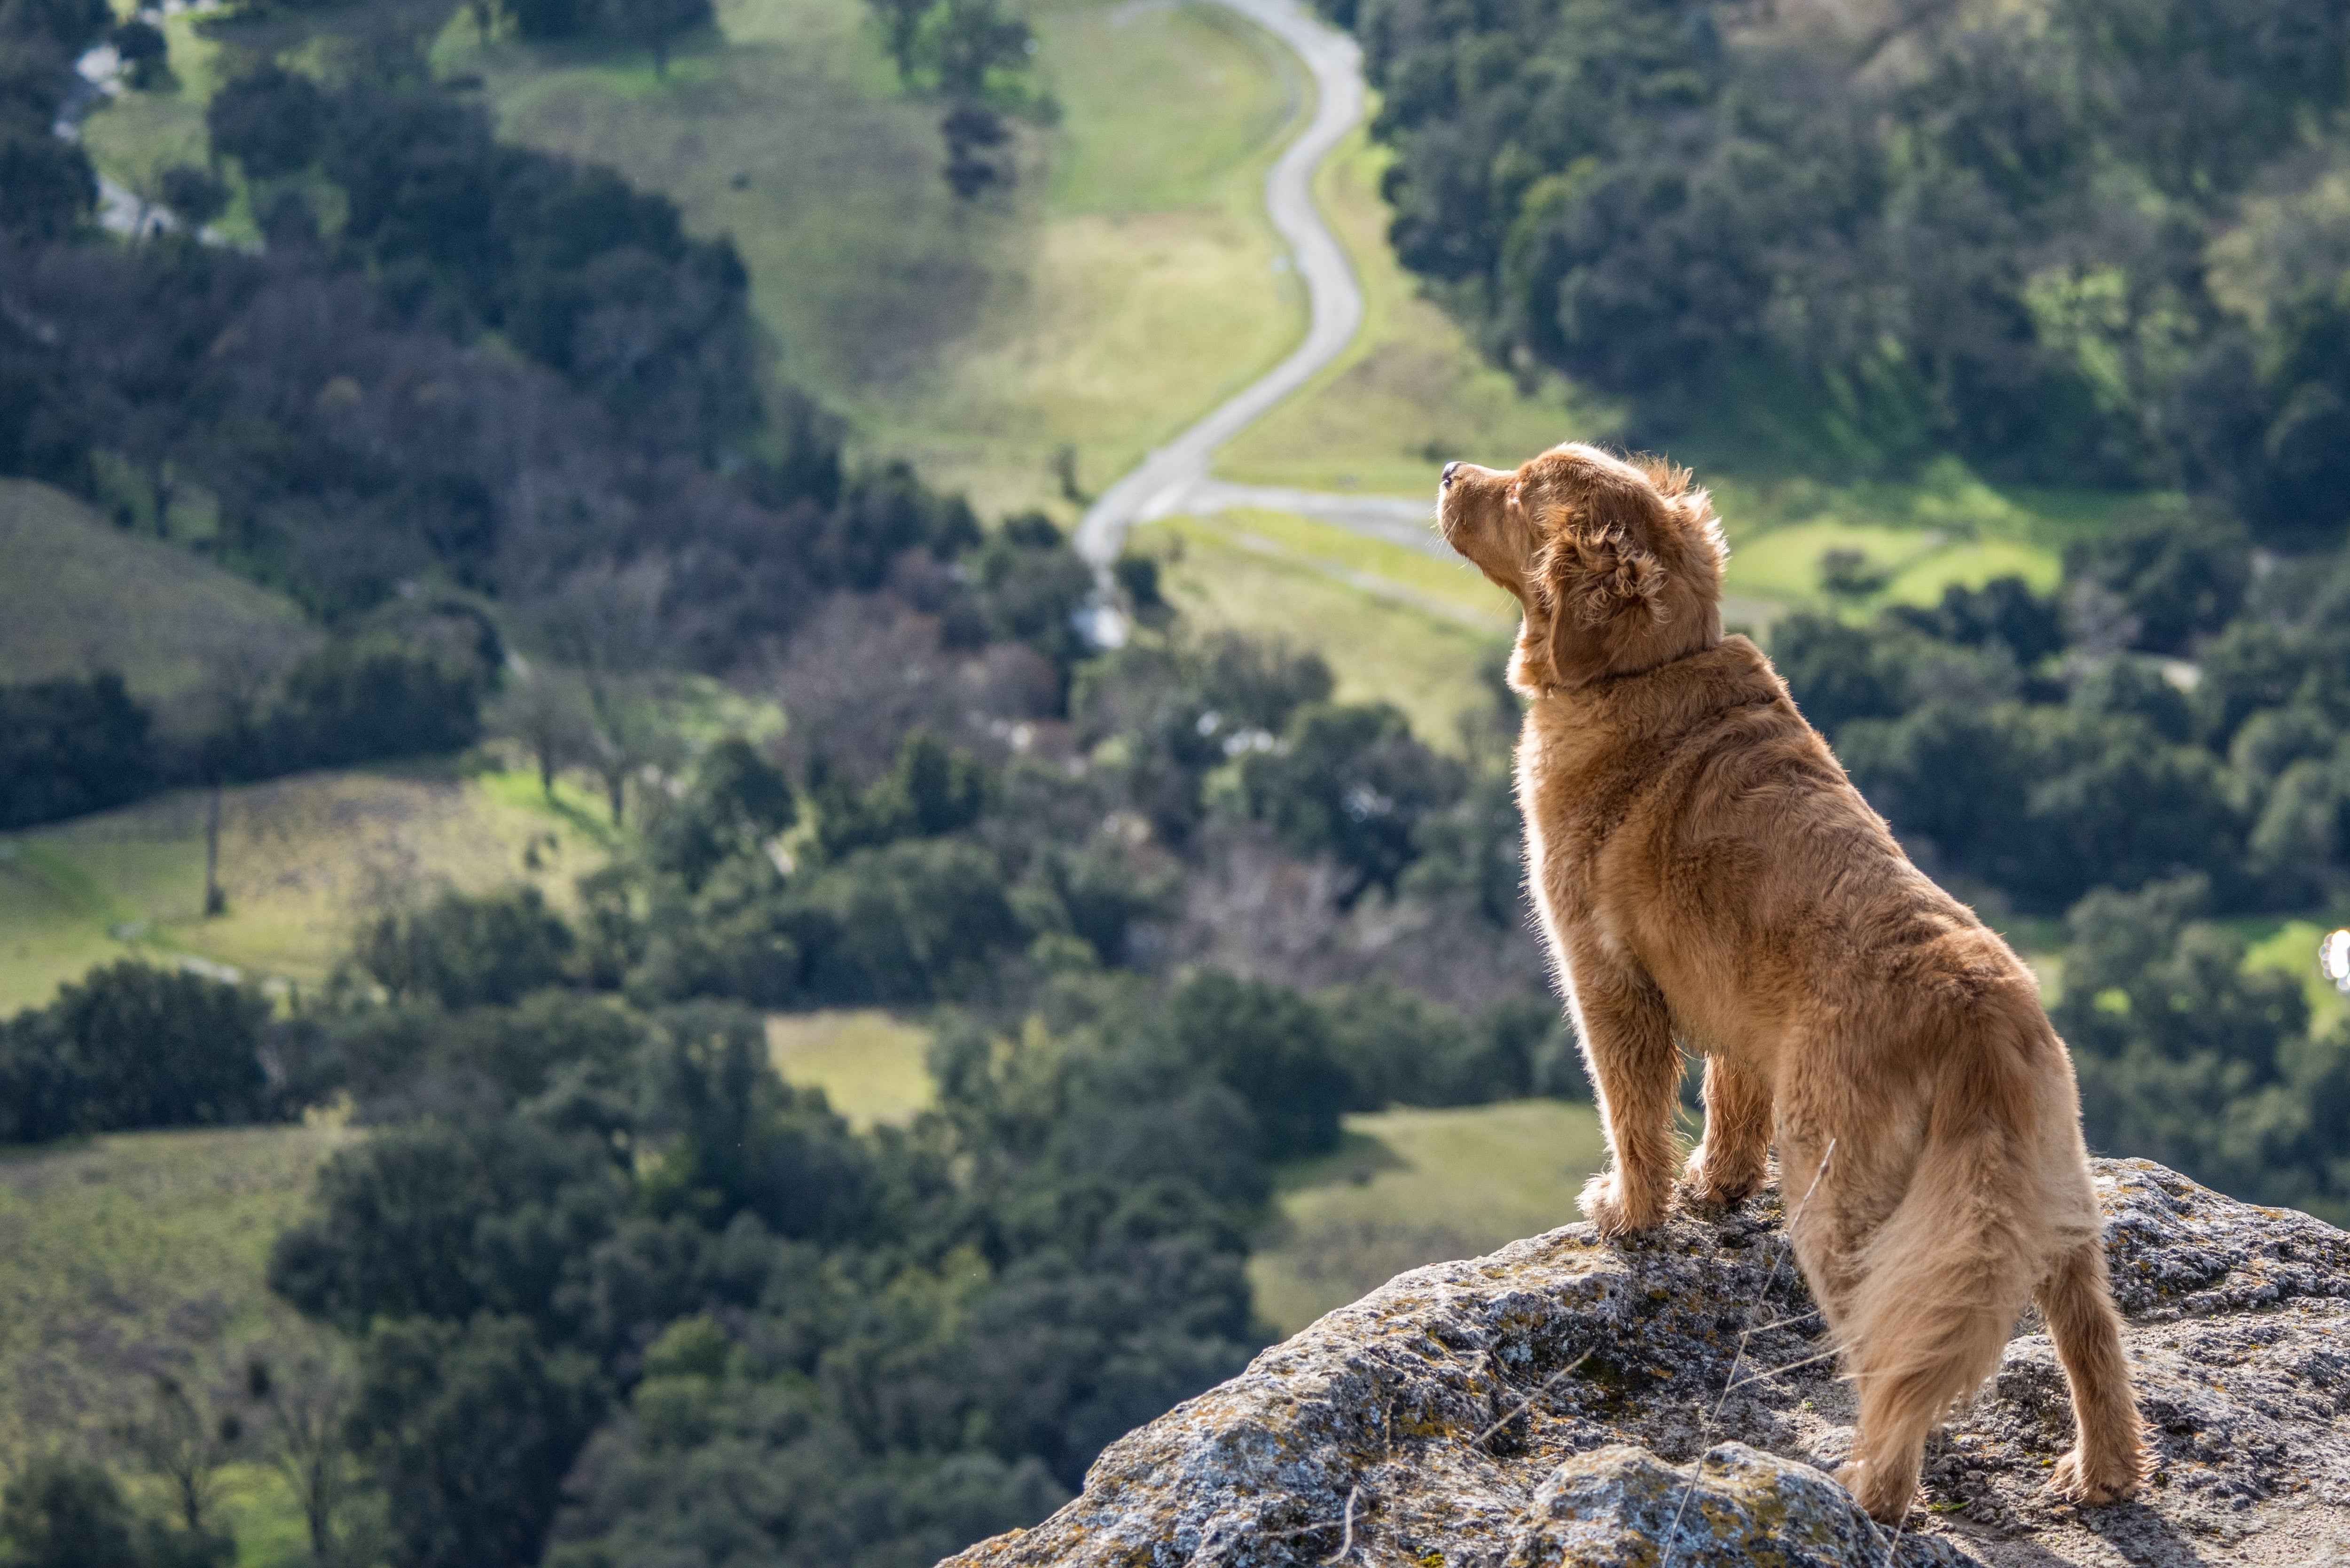 Golden Retriever standing on edge of cliff looking out over forest.